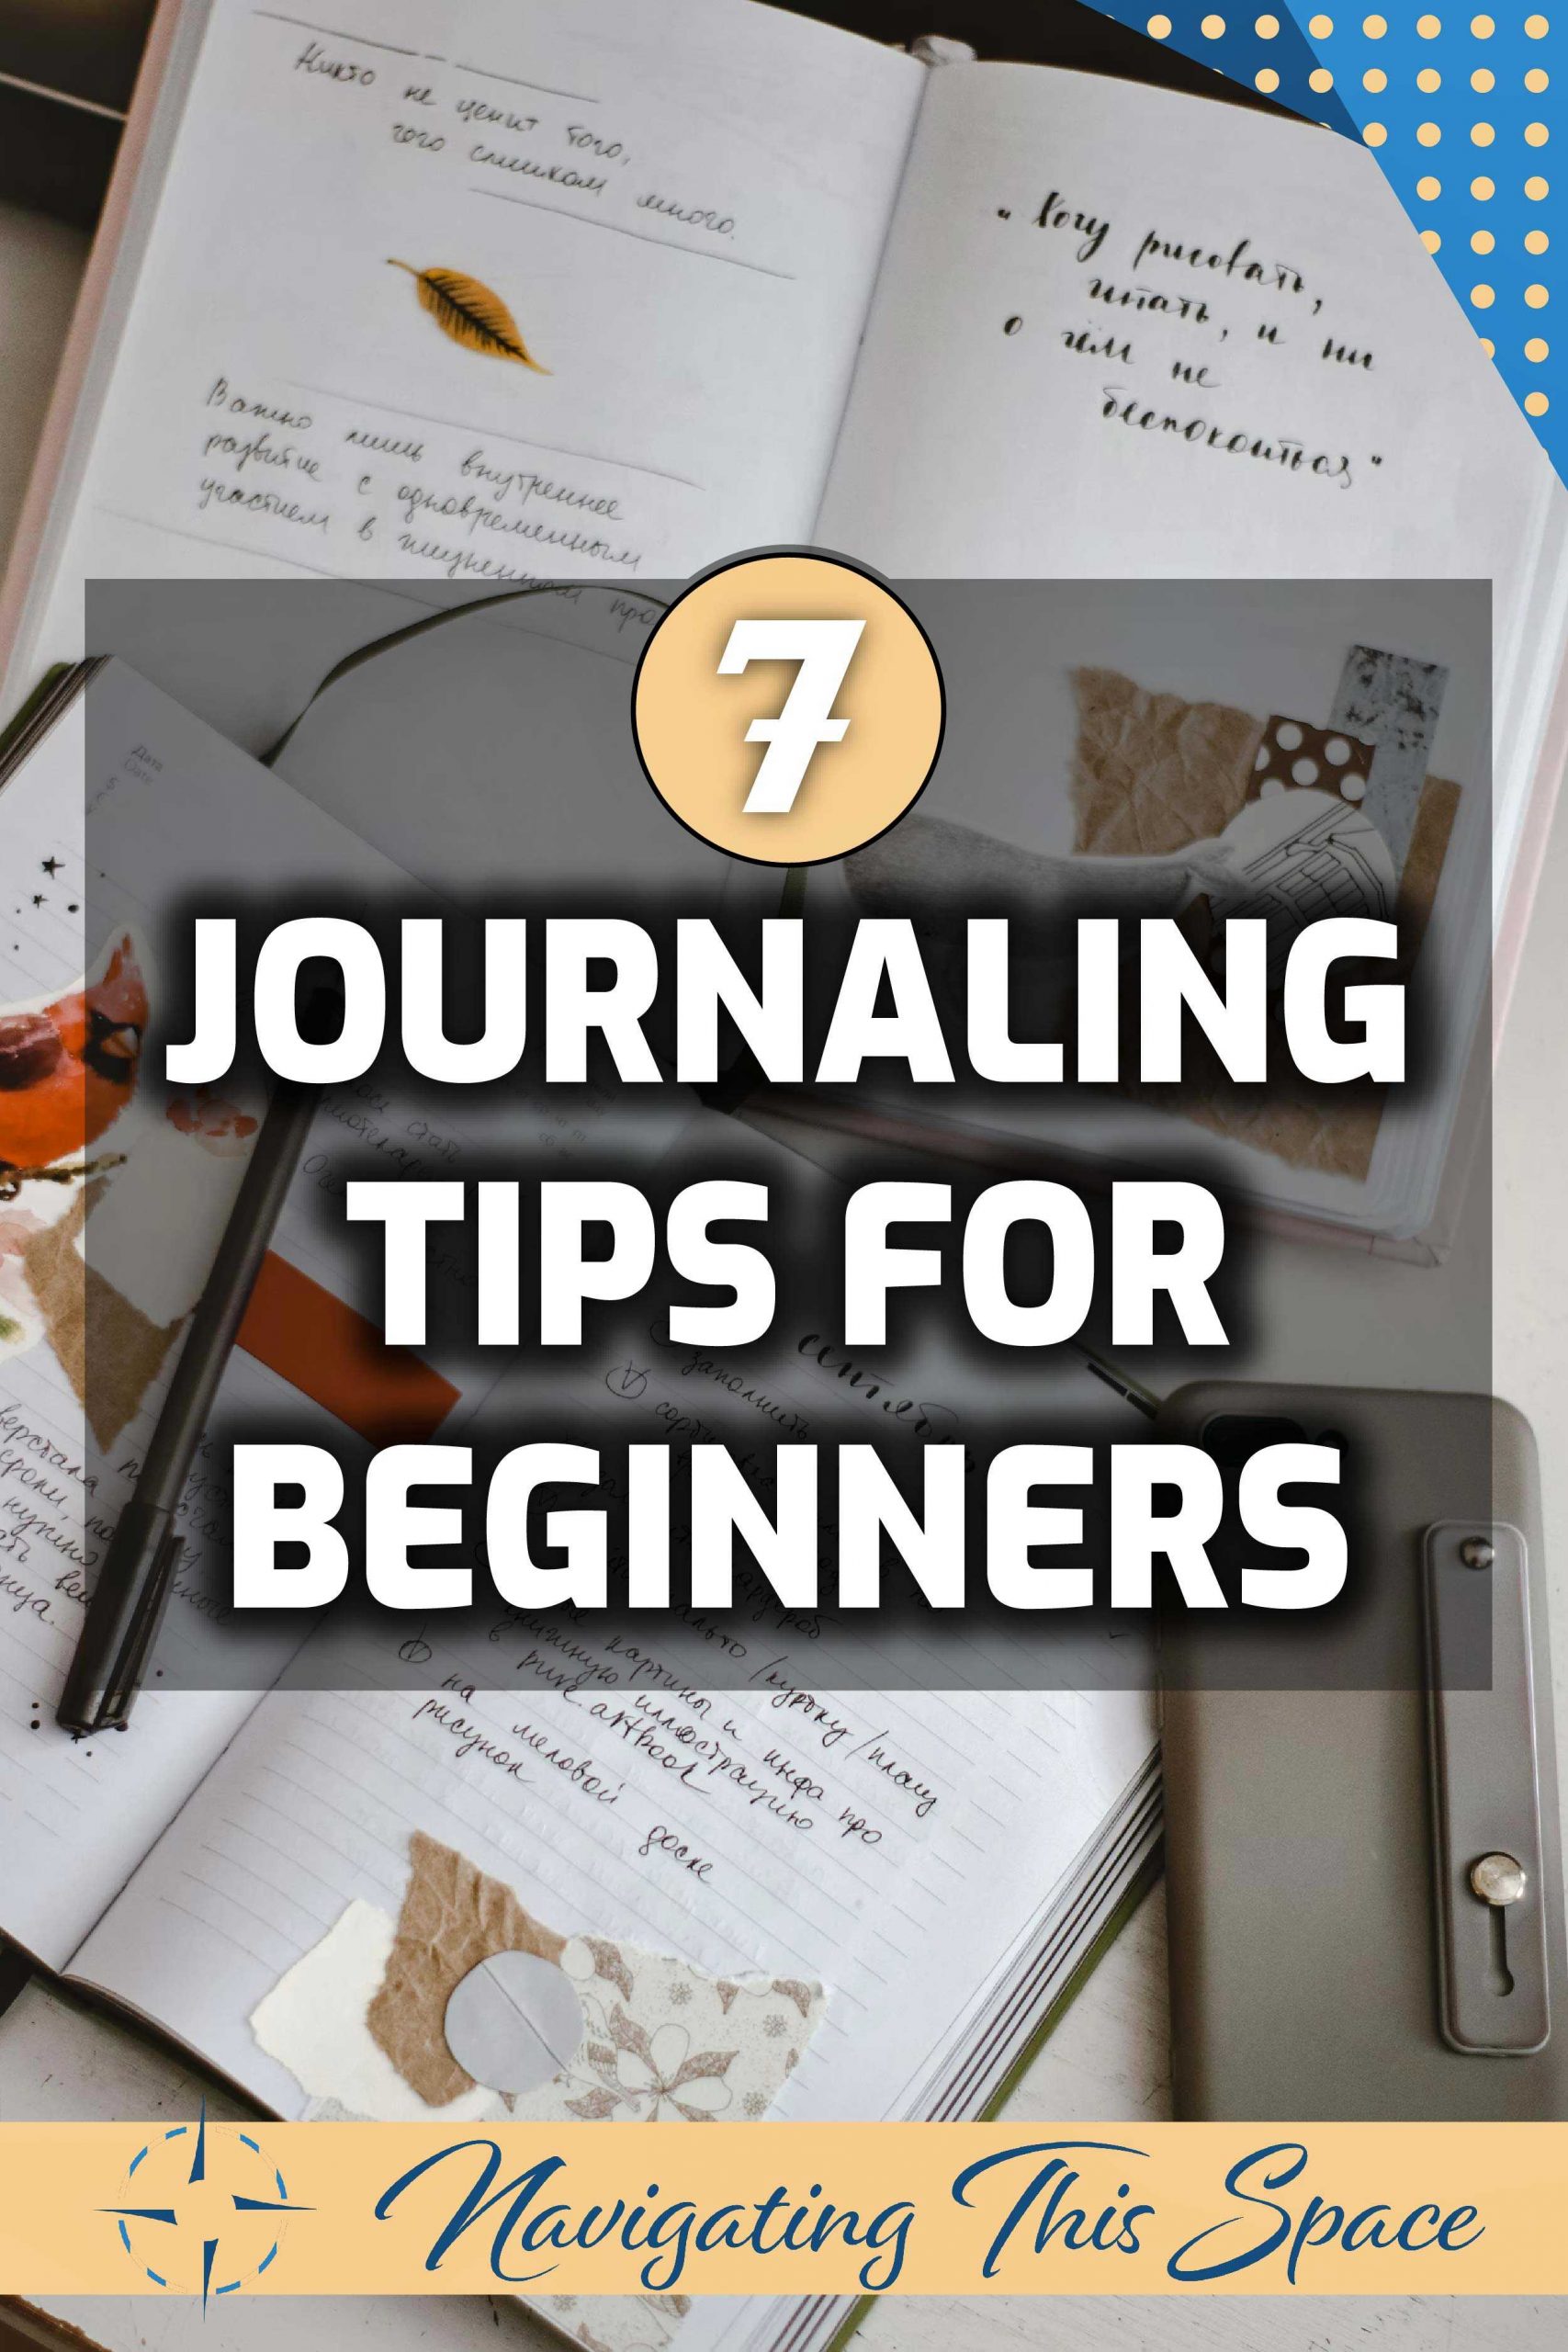 7 Tips for Journaling Daily - Navigating This Space